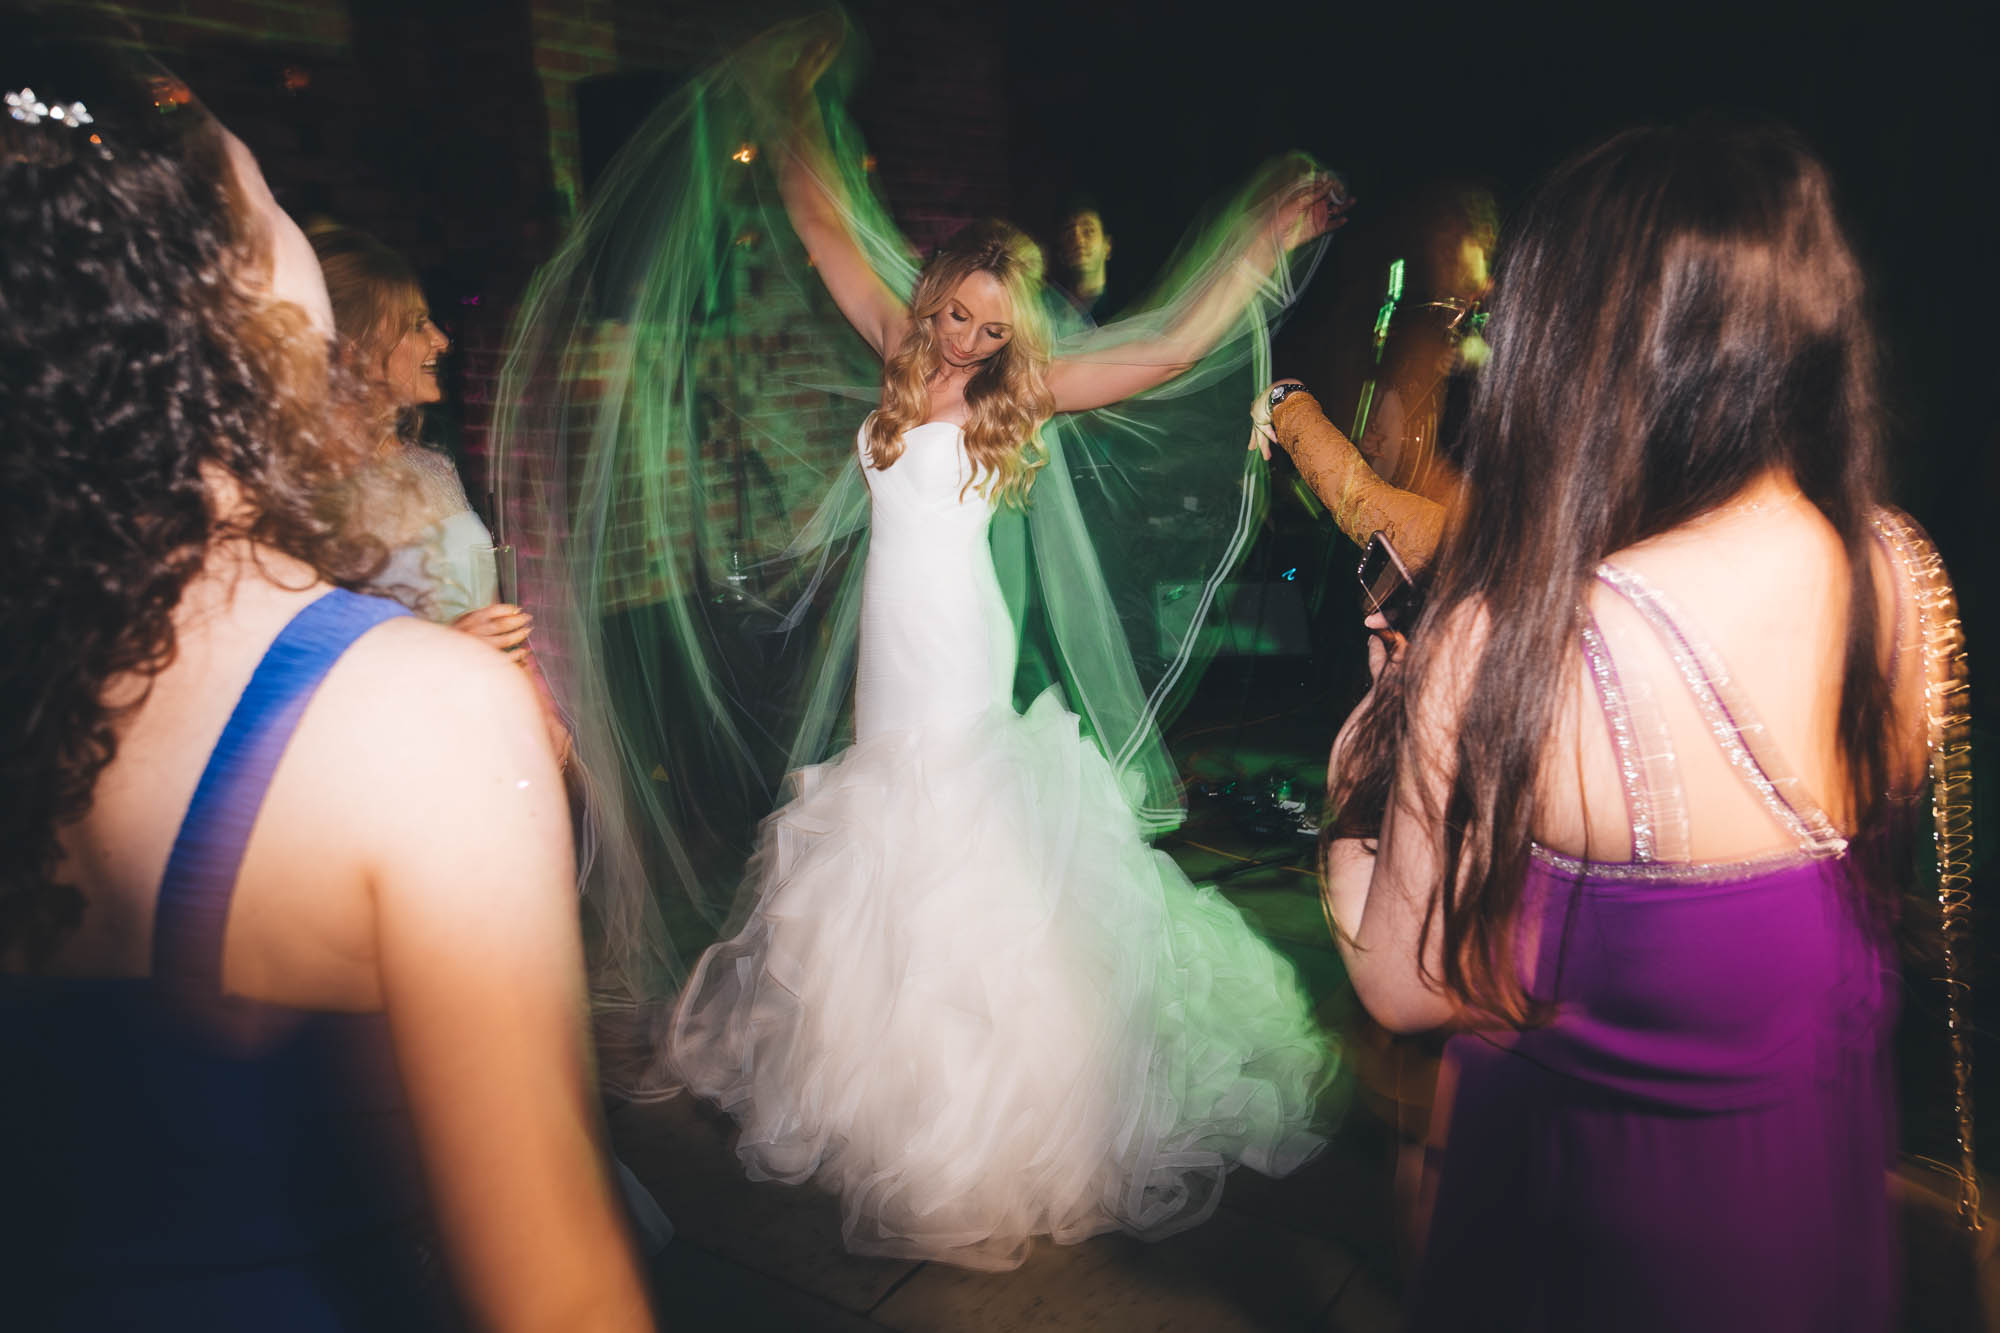 Bride plays with dress as she dances on dancefloor while guests watch